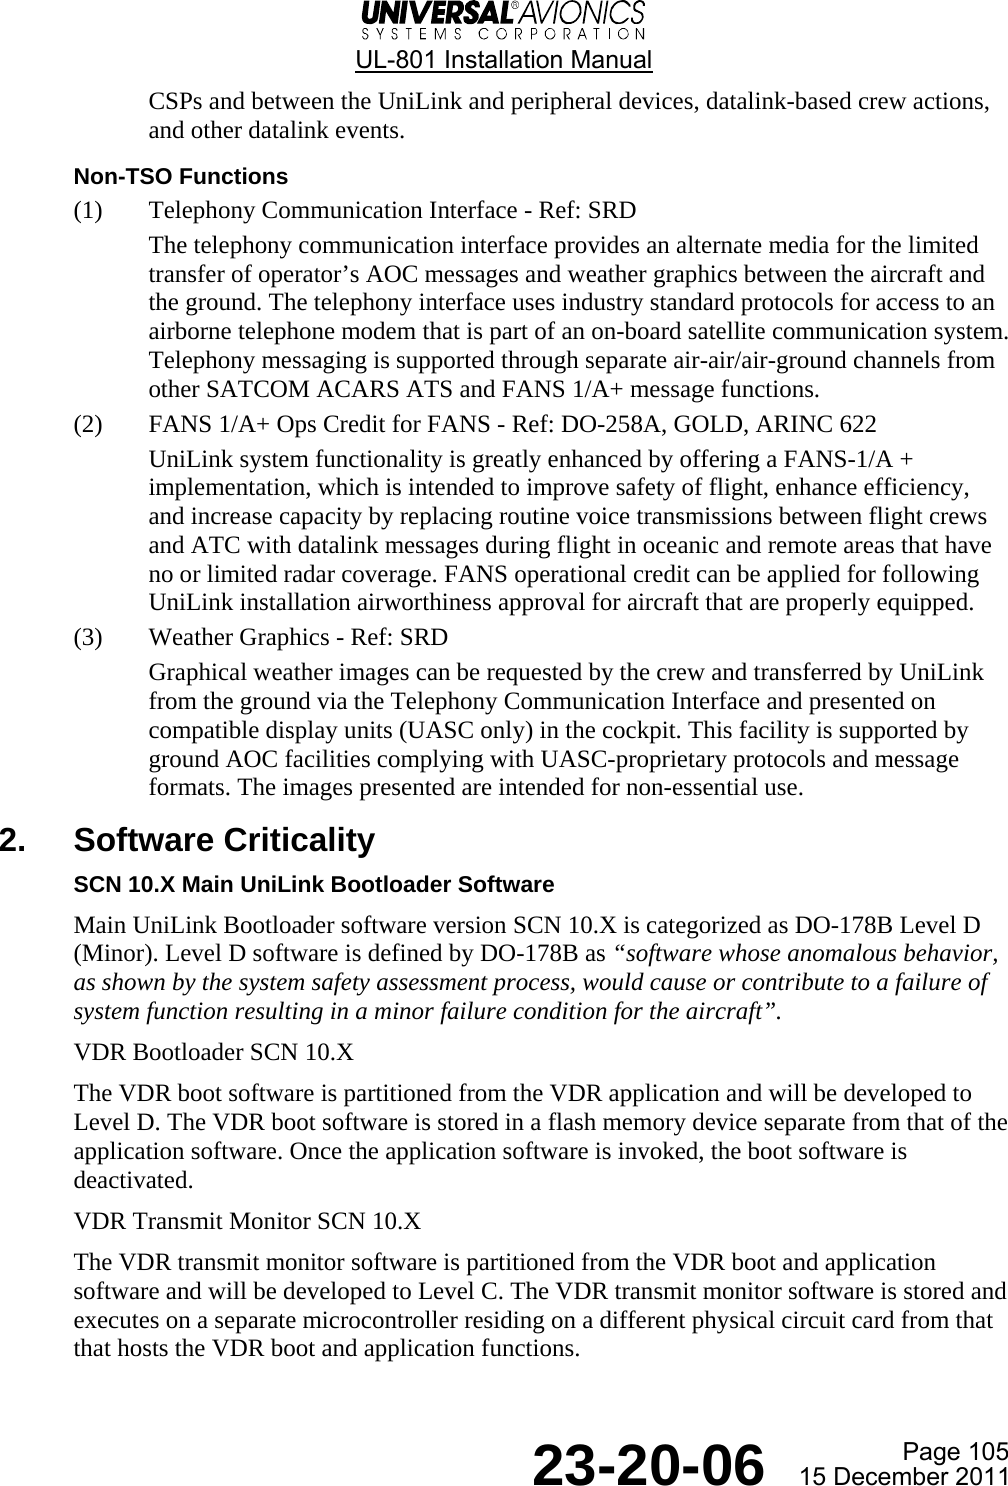  UL-801 Installation Manual Page 105  23-20-06  15 December 2011 CSPs and between the UniLink and peripheral devices, datalink-based crew actions, and other datalink events. Non-TSO Functions (1) Telephony Communication Interface - Ref: SRD The telephony communication interface provides an alternate media for the limited transfer of operator’s AOC messages and weather graphics between the aircraft and the ground. The telephony interface uses industry standard protocols for access to an airborne telephone modem that is part of an on-board satellite communication system. Telephony messaging is supported through separate air-air/air-ground channels from other SATCOM ACARS ATS and FANS 1/A+ message functions. (2) FANS 1/A+ Ops Credit for FANS - Ref: DO-258A, GOLD, ARINC 622 UniLink system functionality is greatly enhanced by offering a FANS-1/A + implementation, which is intended to improve safety of flight, enhance efficiency, and increase capacity by replacing routine voice transmissions between flight crews and ATC with datalink messages during flight in oceanic and remote areas that have no or limited radar coverage. FANS operational credit can be applied for following UniLink installation airworthiness approval for aircraft that are properly equipped. (3) Weather Graphics - Ref: SRD Graphical weather images can be requested by the crew and transferred by UniLink from the ground via the Telephony Communication Interface and presented on compatible display units (UASC only) in the cockpit. This facility is supported by ground AOC facilities complying with UASC-proprietary protocols and message formats. The images presented are intended for non-essential use. 2. Software Criticality SCN 10.X Main UniLink Bootloader Software Main UniLink Bootloader software version SCN 10.X is categorized as DO-178B Level D (Minor). Level D software is defined by DO-178B as “software whose anomalous behavior, as shown by the system safety assessment process, would cause or contribute to a failure of system function resulting in a minor failure condition for the aircraft”. VDR Bootloader SCN 10.X The VDR boot software is partitioned from the VDR application and will be developed to Level D. The VDR boot software is stored in a flash memory device separate from that of the application software. Once the application software is invoked, the boot software is deactivated. VDR Transmit Monitor SCN 10.X The VDR transmit monitor software is partitioned from the VDR boot and application software and will be developed to Level C. The VDR transmit monitor software is stored and executes on a separate microcontroller residing on a different physical circuit card from that that hosts the VDR boot and application functions.   